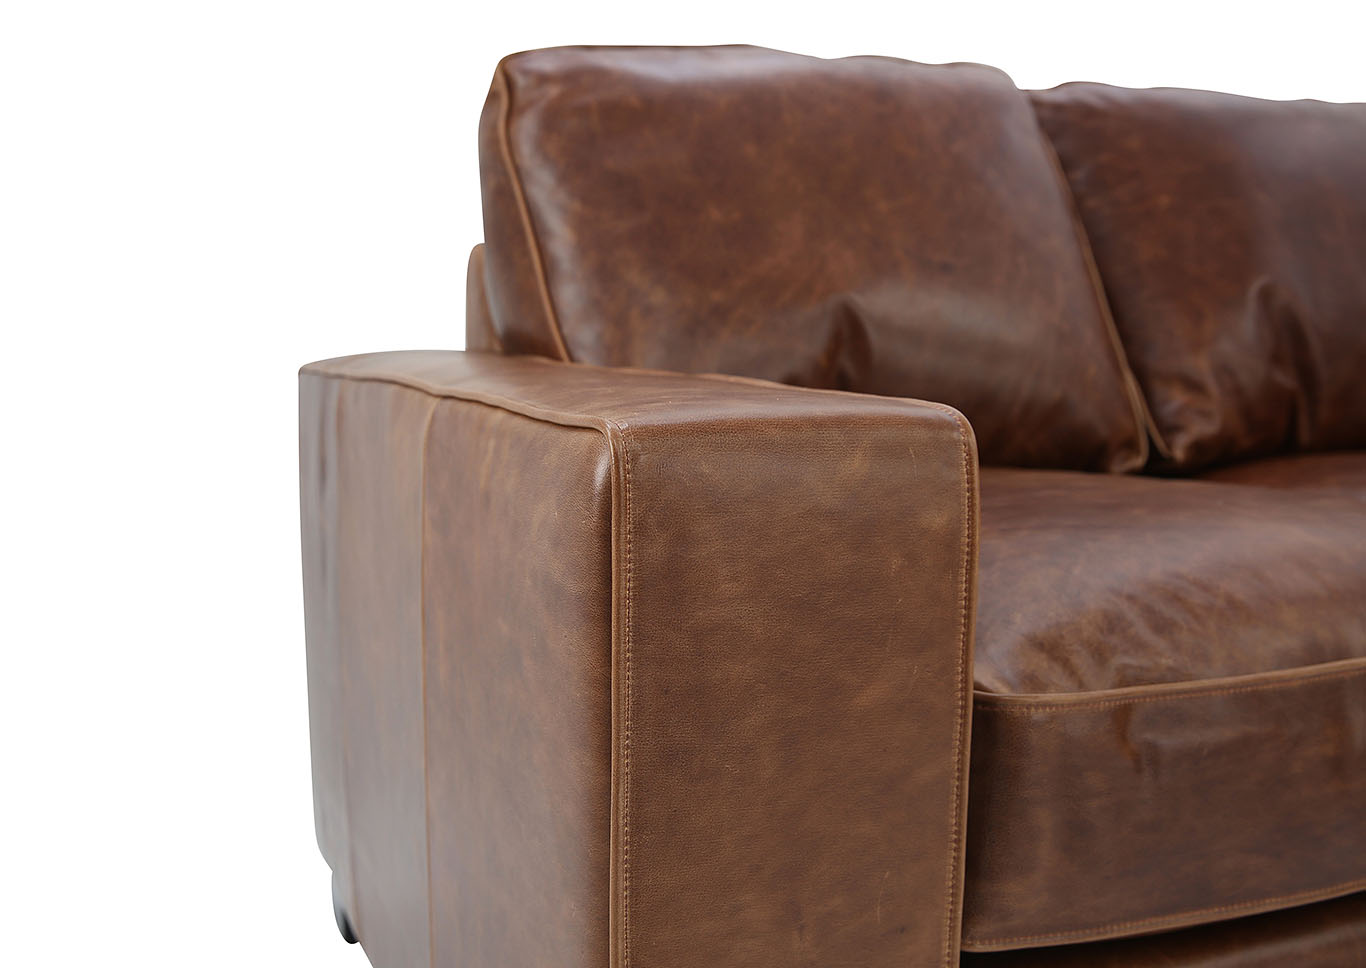 CHARLEY CHOCOLATE LEATHER 3 PIECE SECTIONAL,NEWS SRL